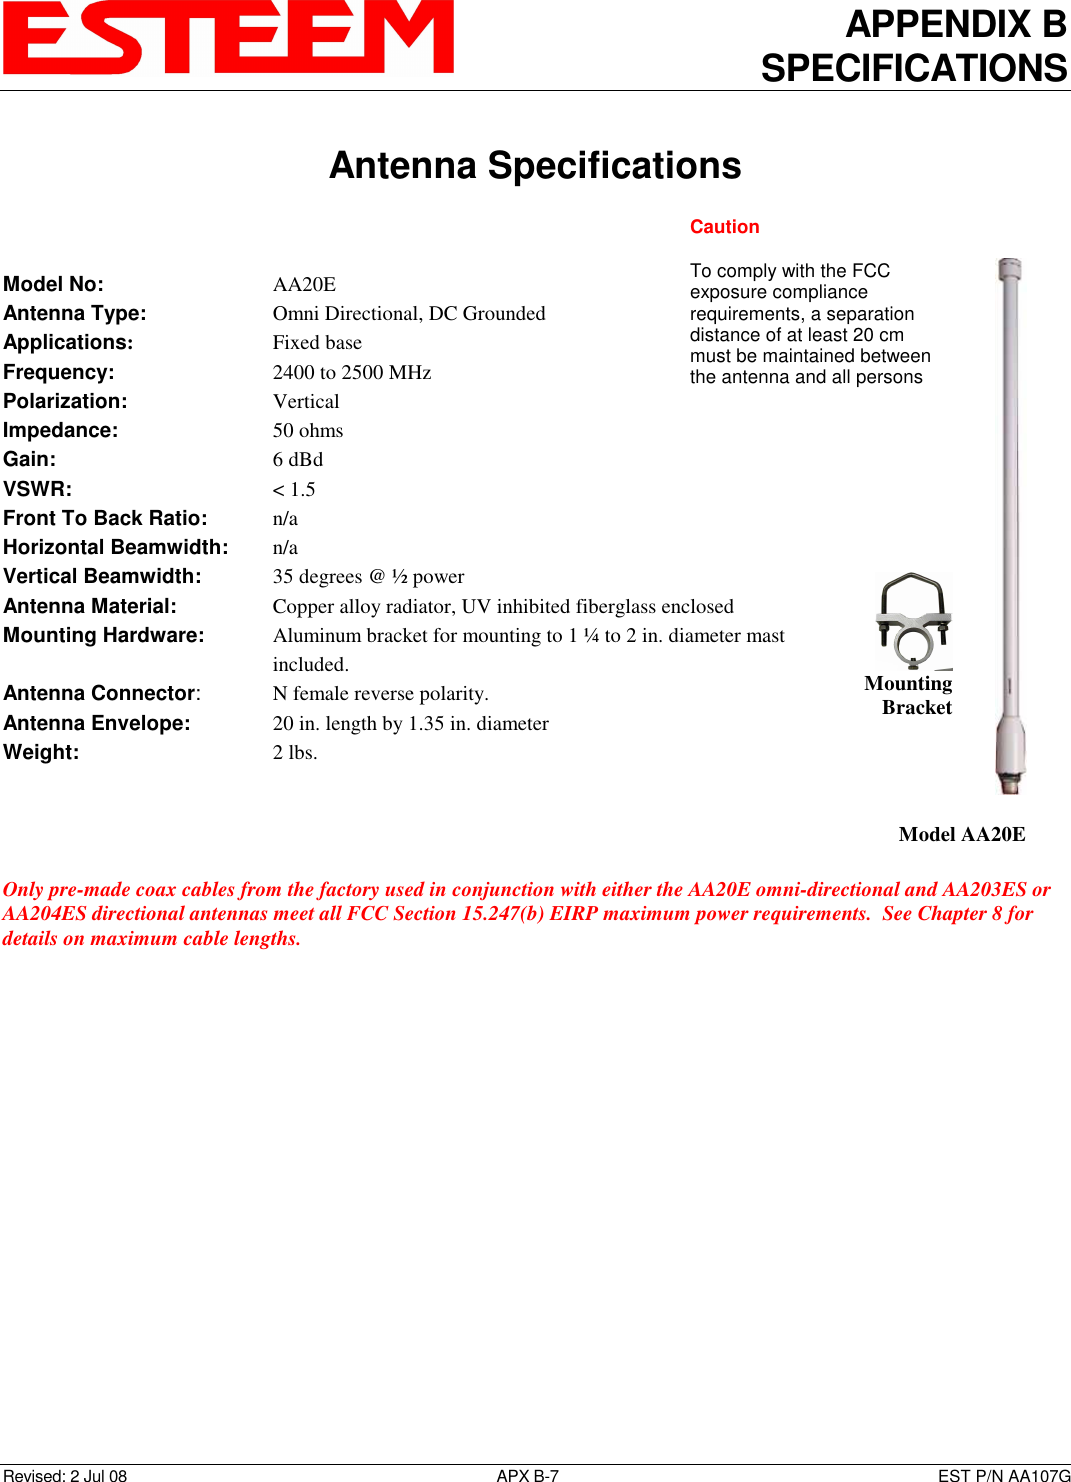 APPENDIX B SPECIFICATIONS   Antenna Specifications  Revised: 2 Jul 08  APX B-7  EST P/N AA107G   Model No:        AA20E Antenna Type:      Omni Directional, DC Grounded Applications:       Fixed base Frequency:        2400 to 2500 MHz  Polarization:        Vertical Impedance:        50 ohms Gain:          6 dBd VSWR:          &lt; 1.5  Front To Back Ratio:    n/a Horizontal Beamwidth:  n/a Vertical Beamwidth:      35 degrees @ ½ power Antenna Material:     Copper alloy radiator, UV inhibited fiberglass enclosed  Mounting Hardware:      Aluminum bracket for mounting to 1 ¼ to 2 in. diameter mast included.  Antenna Connector:    N female reverse polarity. Antenna Envelope:    20 in. length by 1.35 in. diameter Weight:           2 lbs.     Only pre-made coax cables from the factory used in conjunction with either the AA20E omni-directional and AA203ES or AA204ES directional antennas meet all FCC Section 15.247(b) EIRP maximum power requirements.  See Chapter 8 for details on maximum cable lengths.       Model AA20E  Mounting Bracket Caution  To comply with the FCC exposure compliance requirements, a separation distance of at least 20 cm must be maintained between the antenna and all persons 